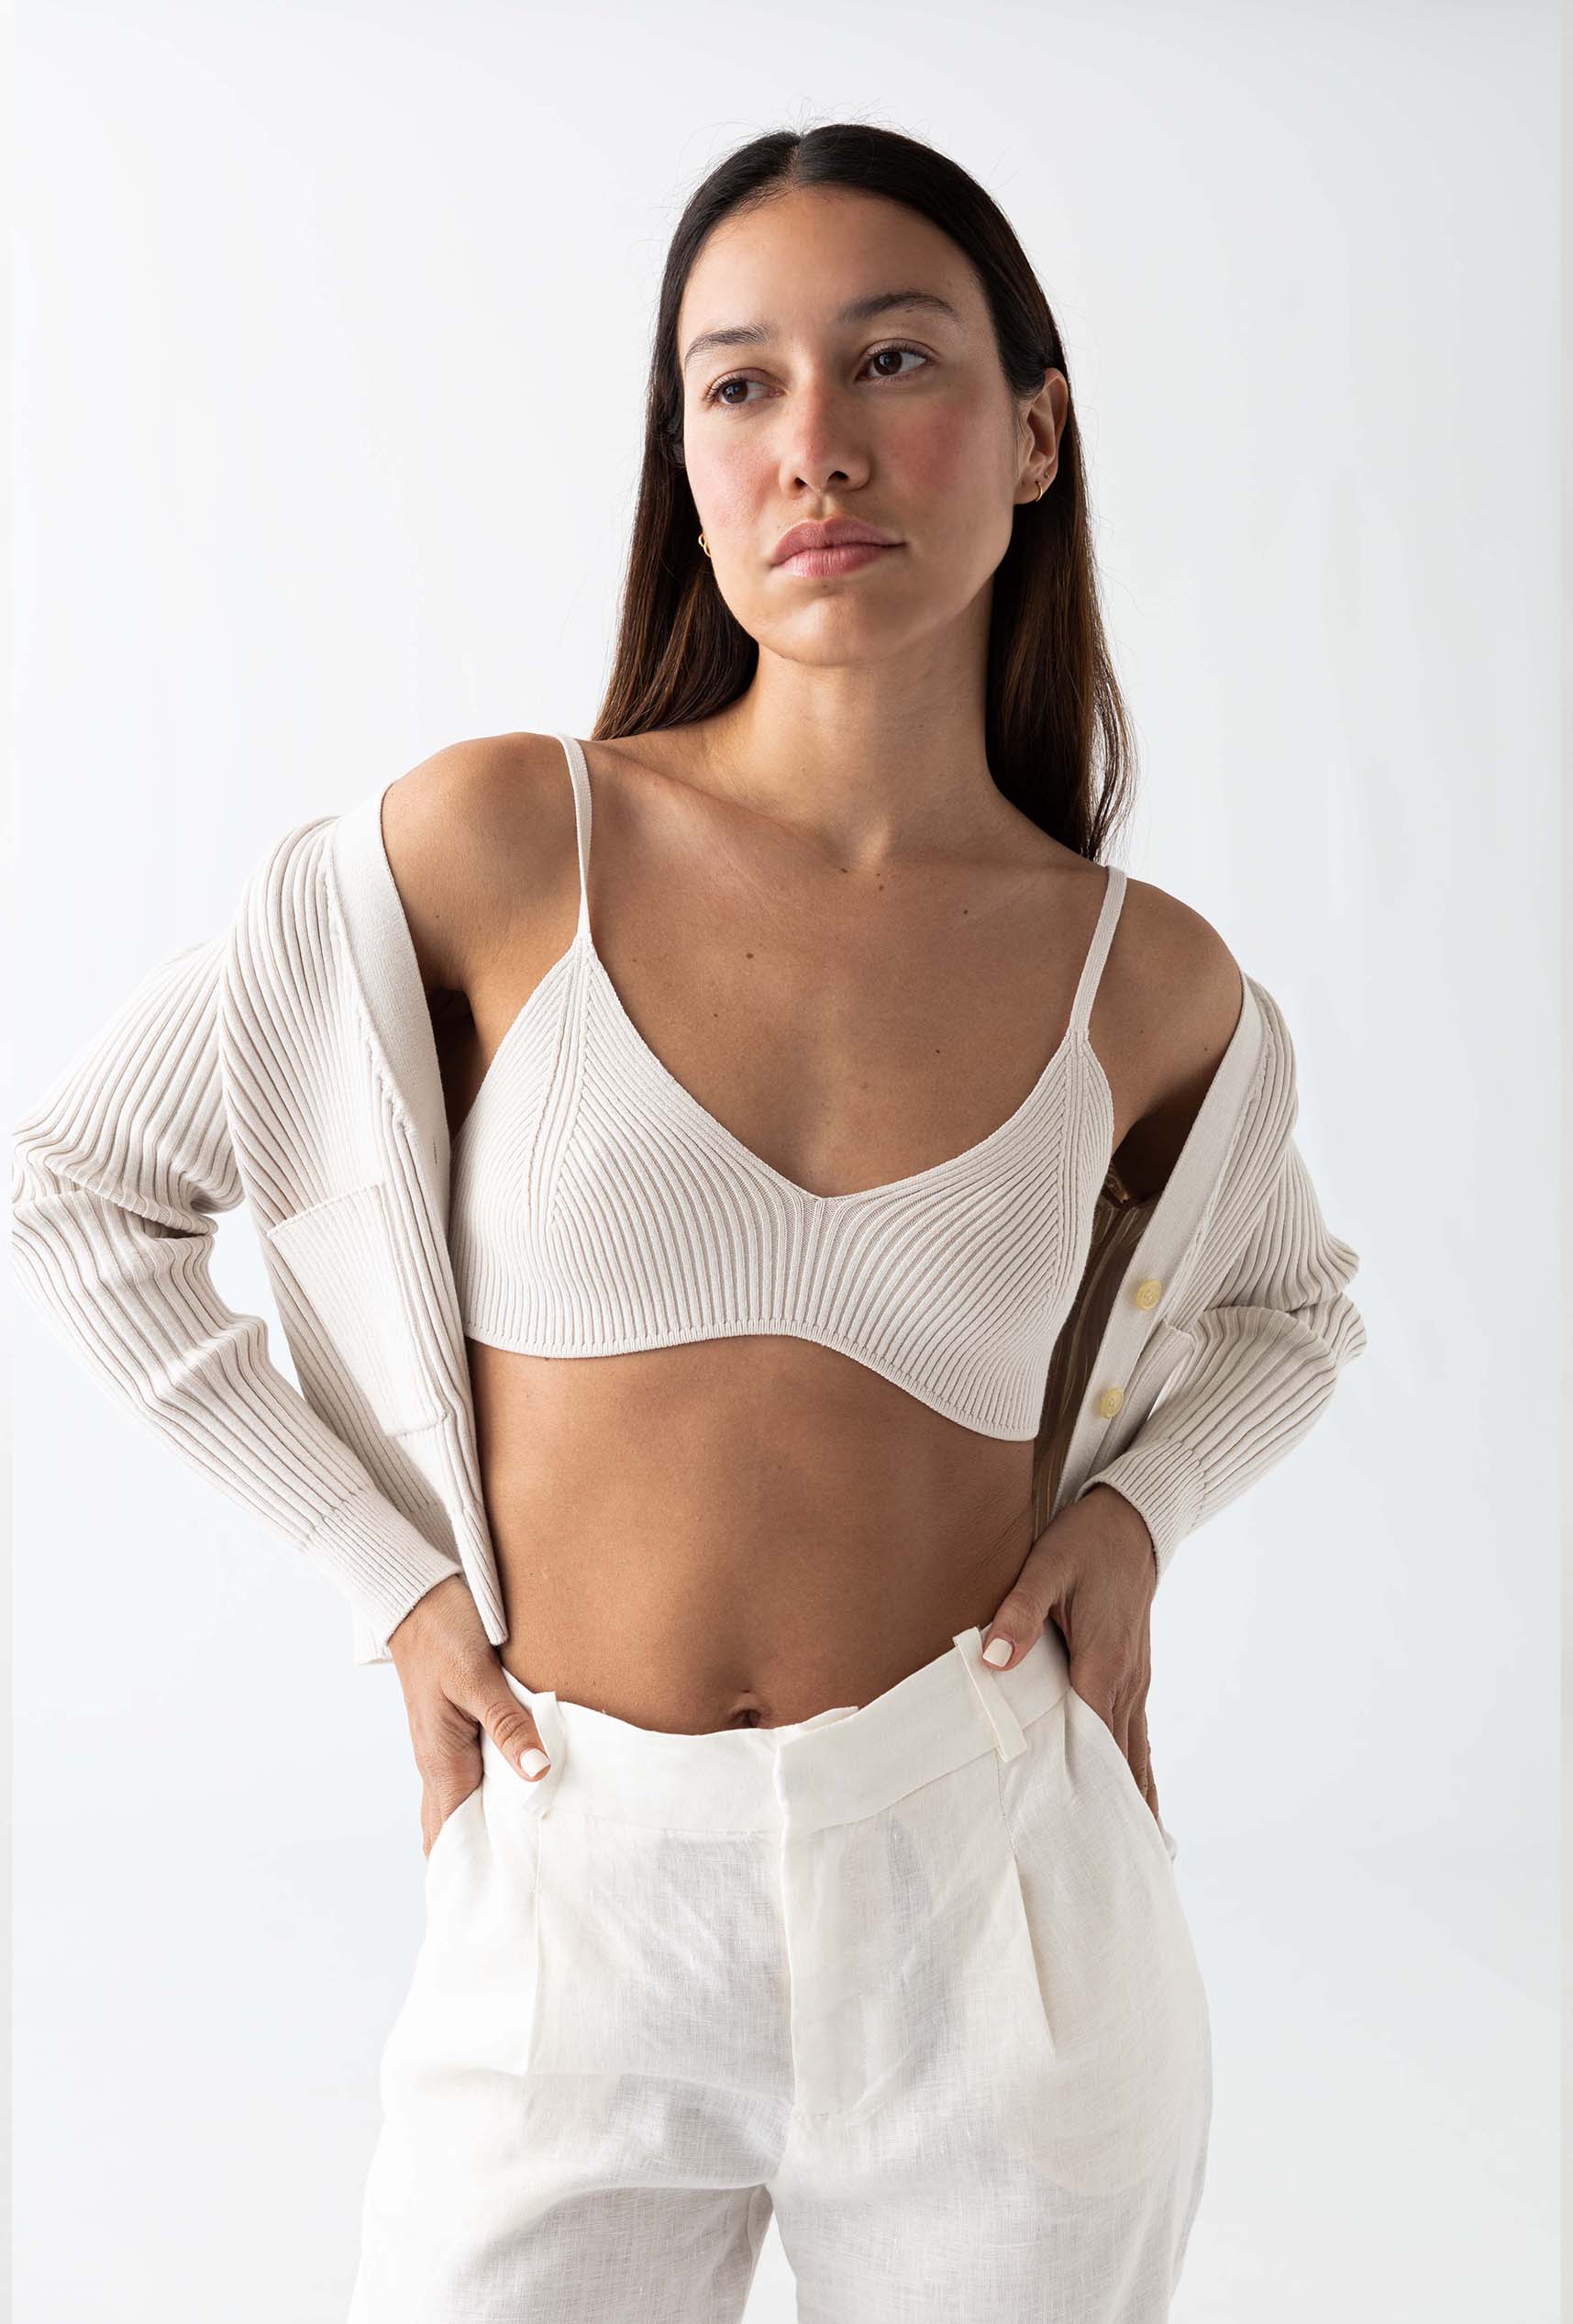 The Knit Set Off-White